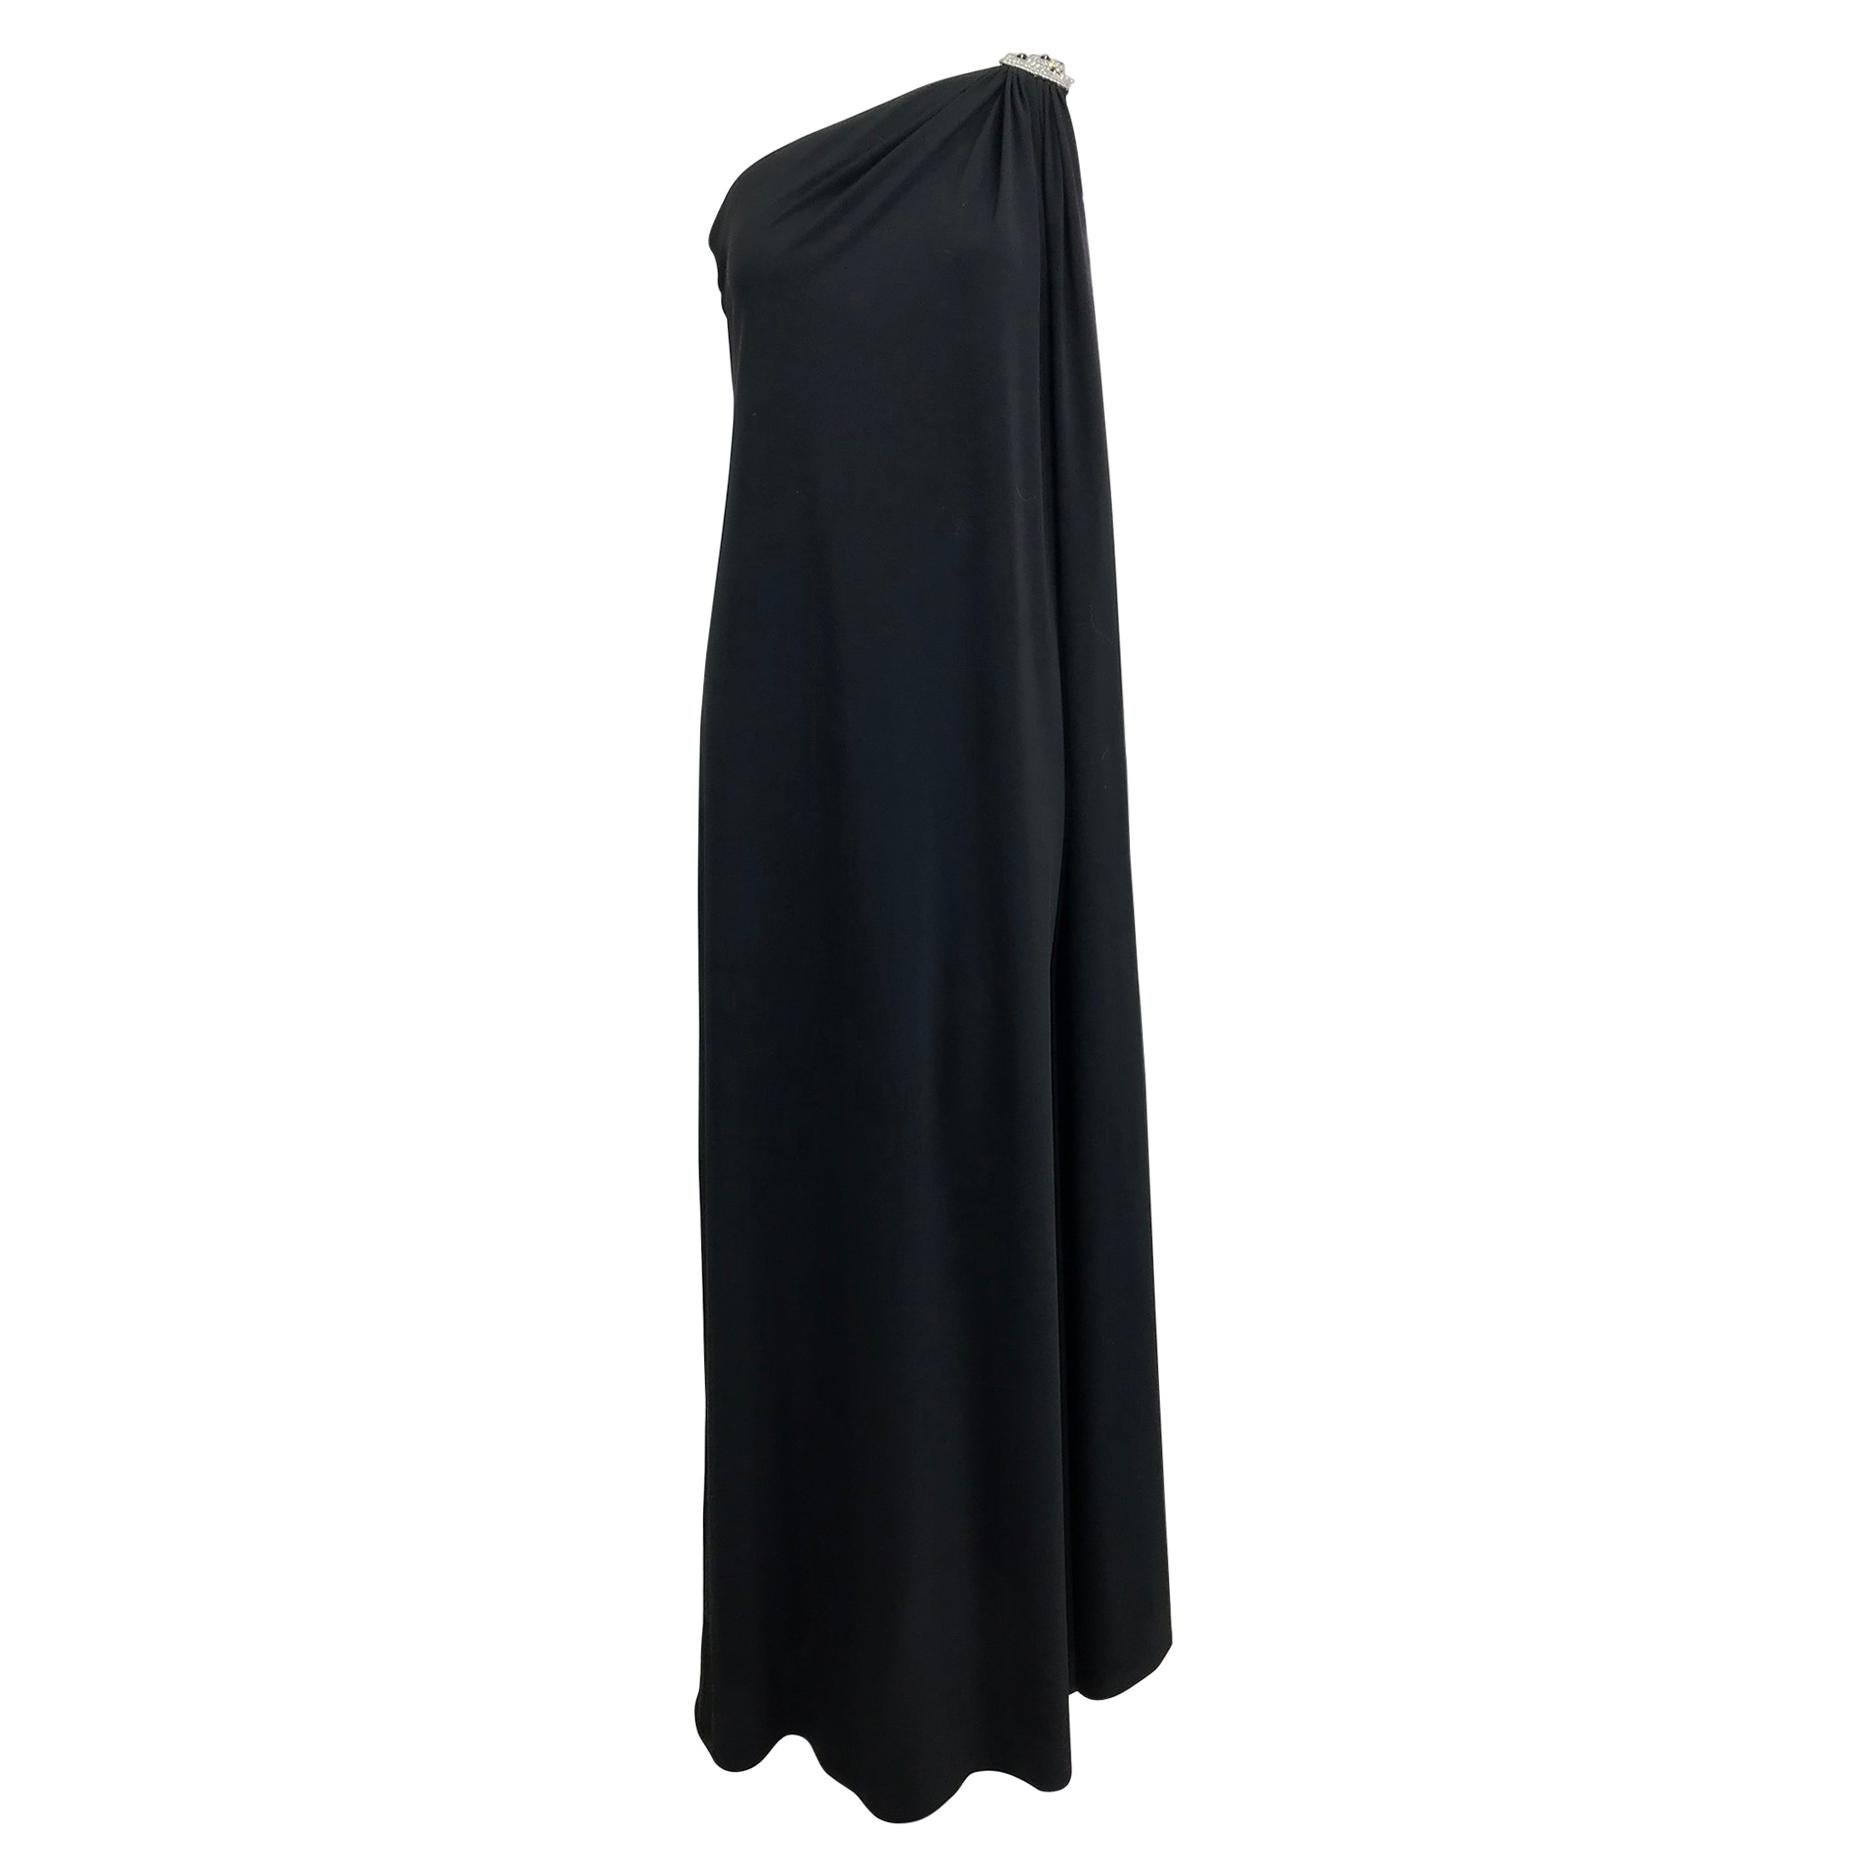 Adele Simpson black jersey one shoulder gown with jewel clasp